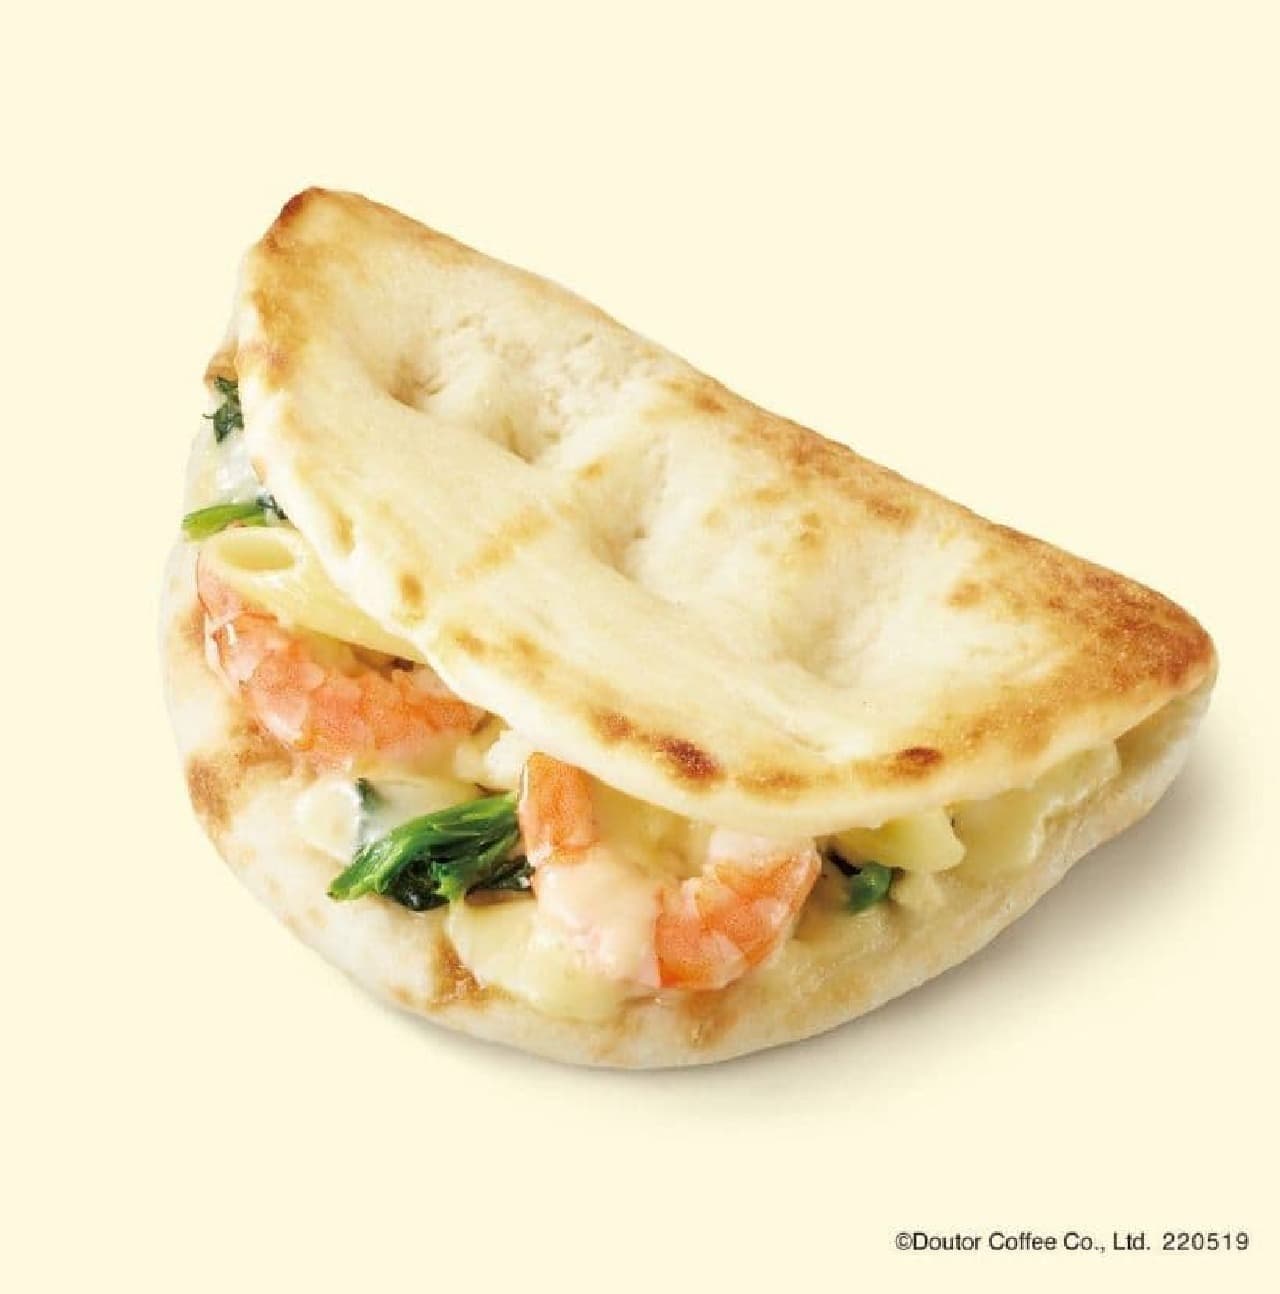 Eat-in "Calzone Shrimp and Spinach Creamy Gratin"